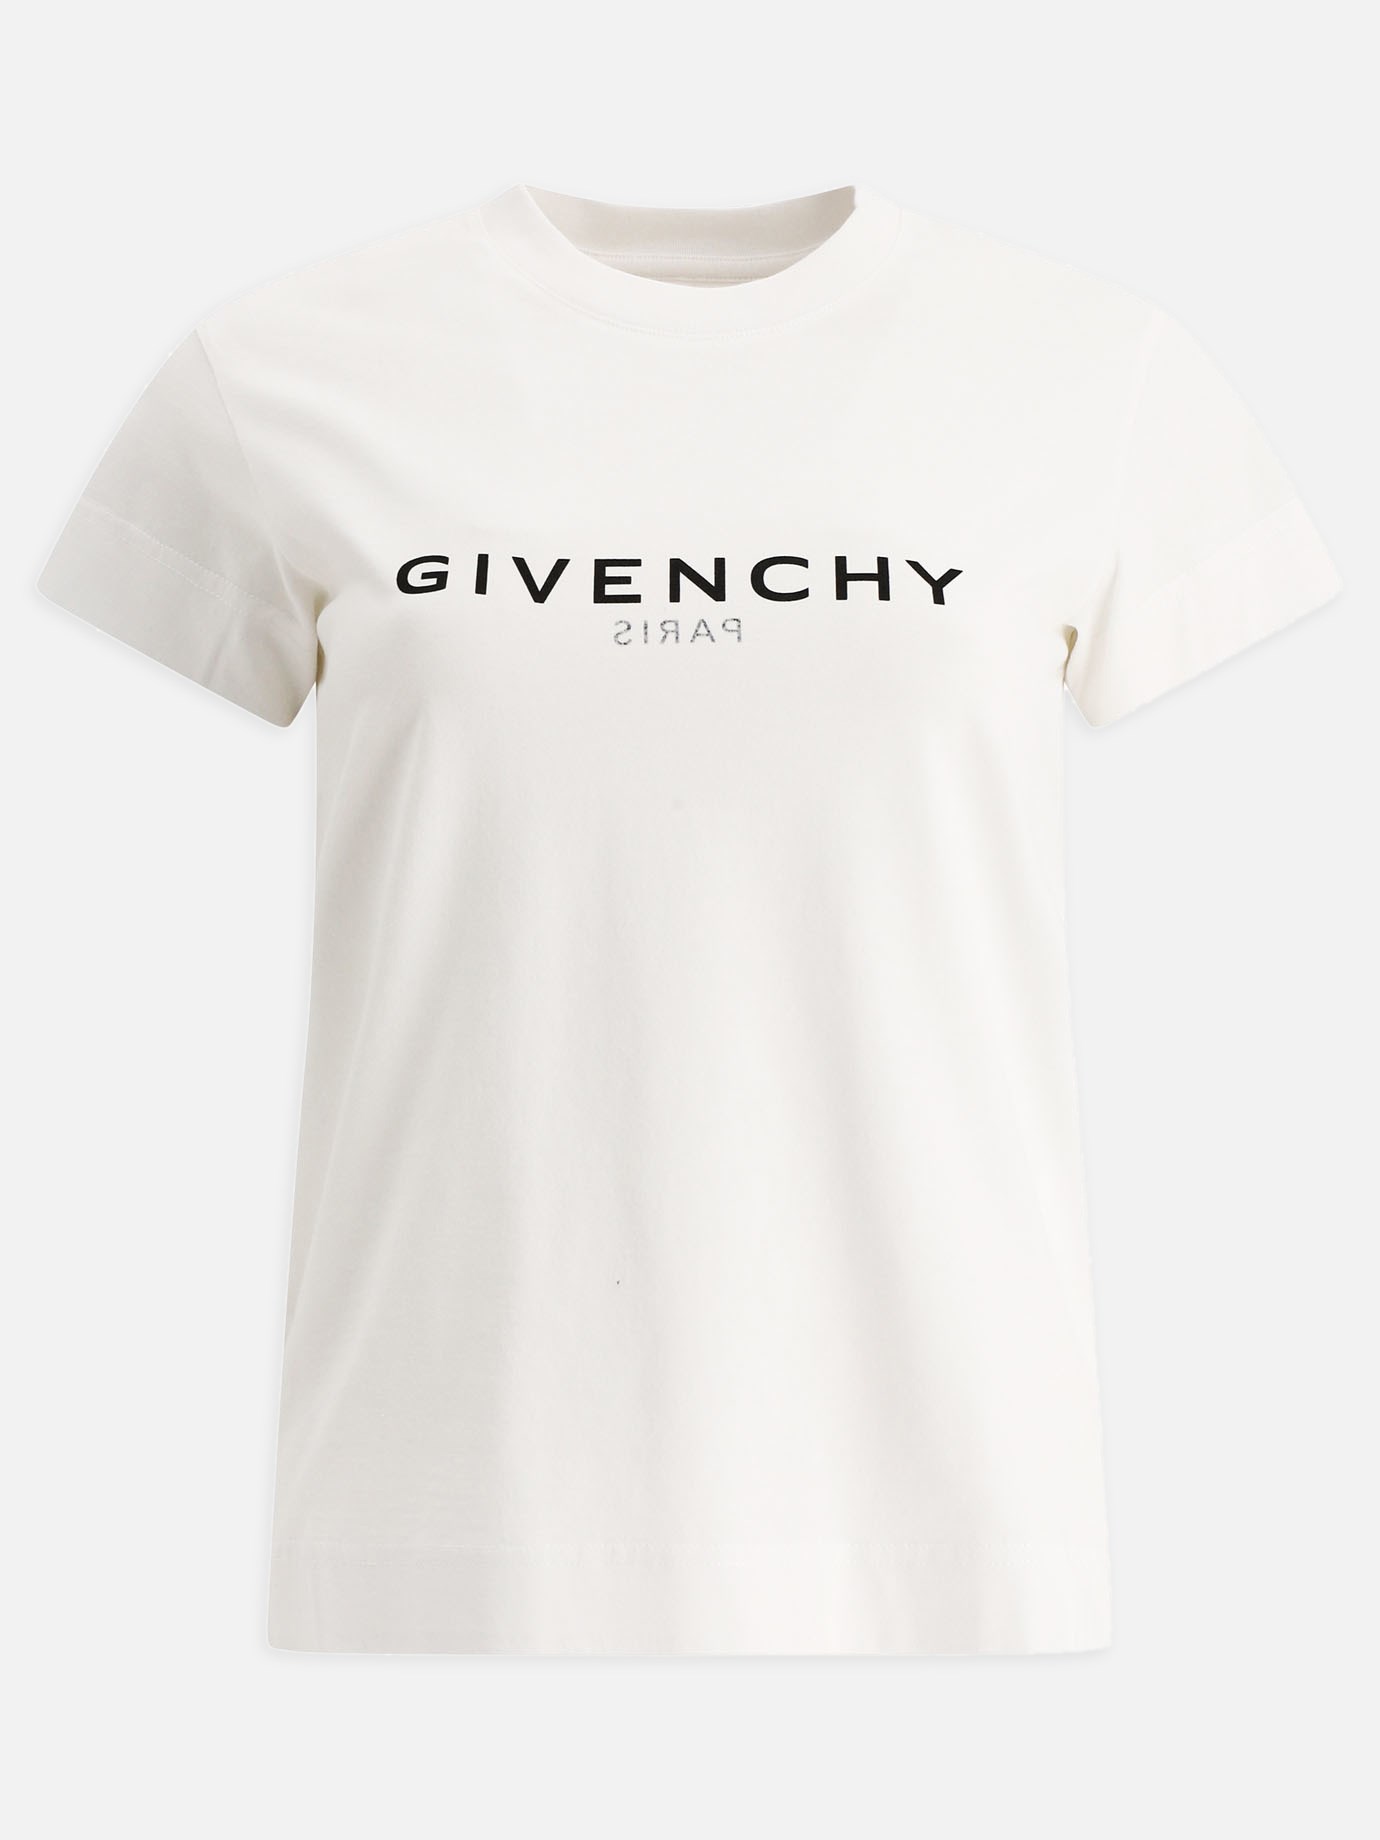  Givenchy Reverse  t-shirtby Givenchy - 5